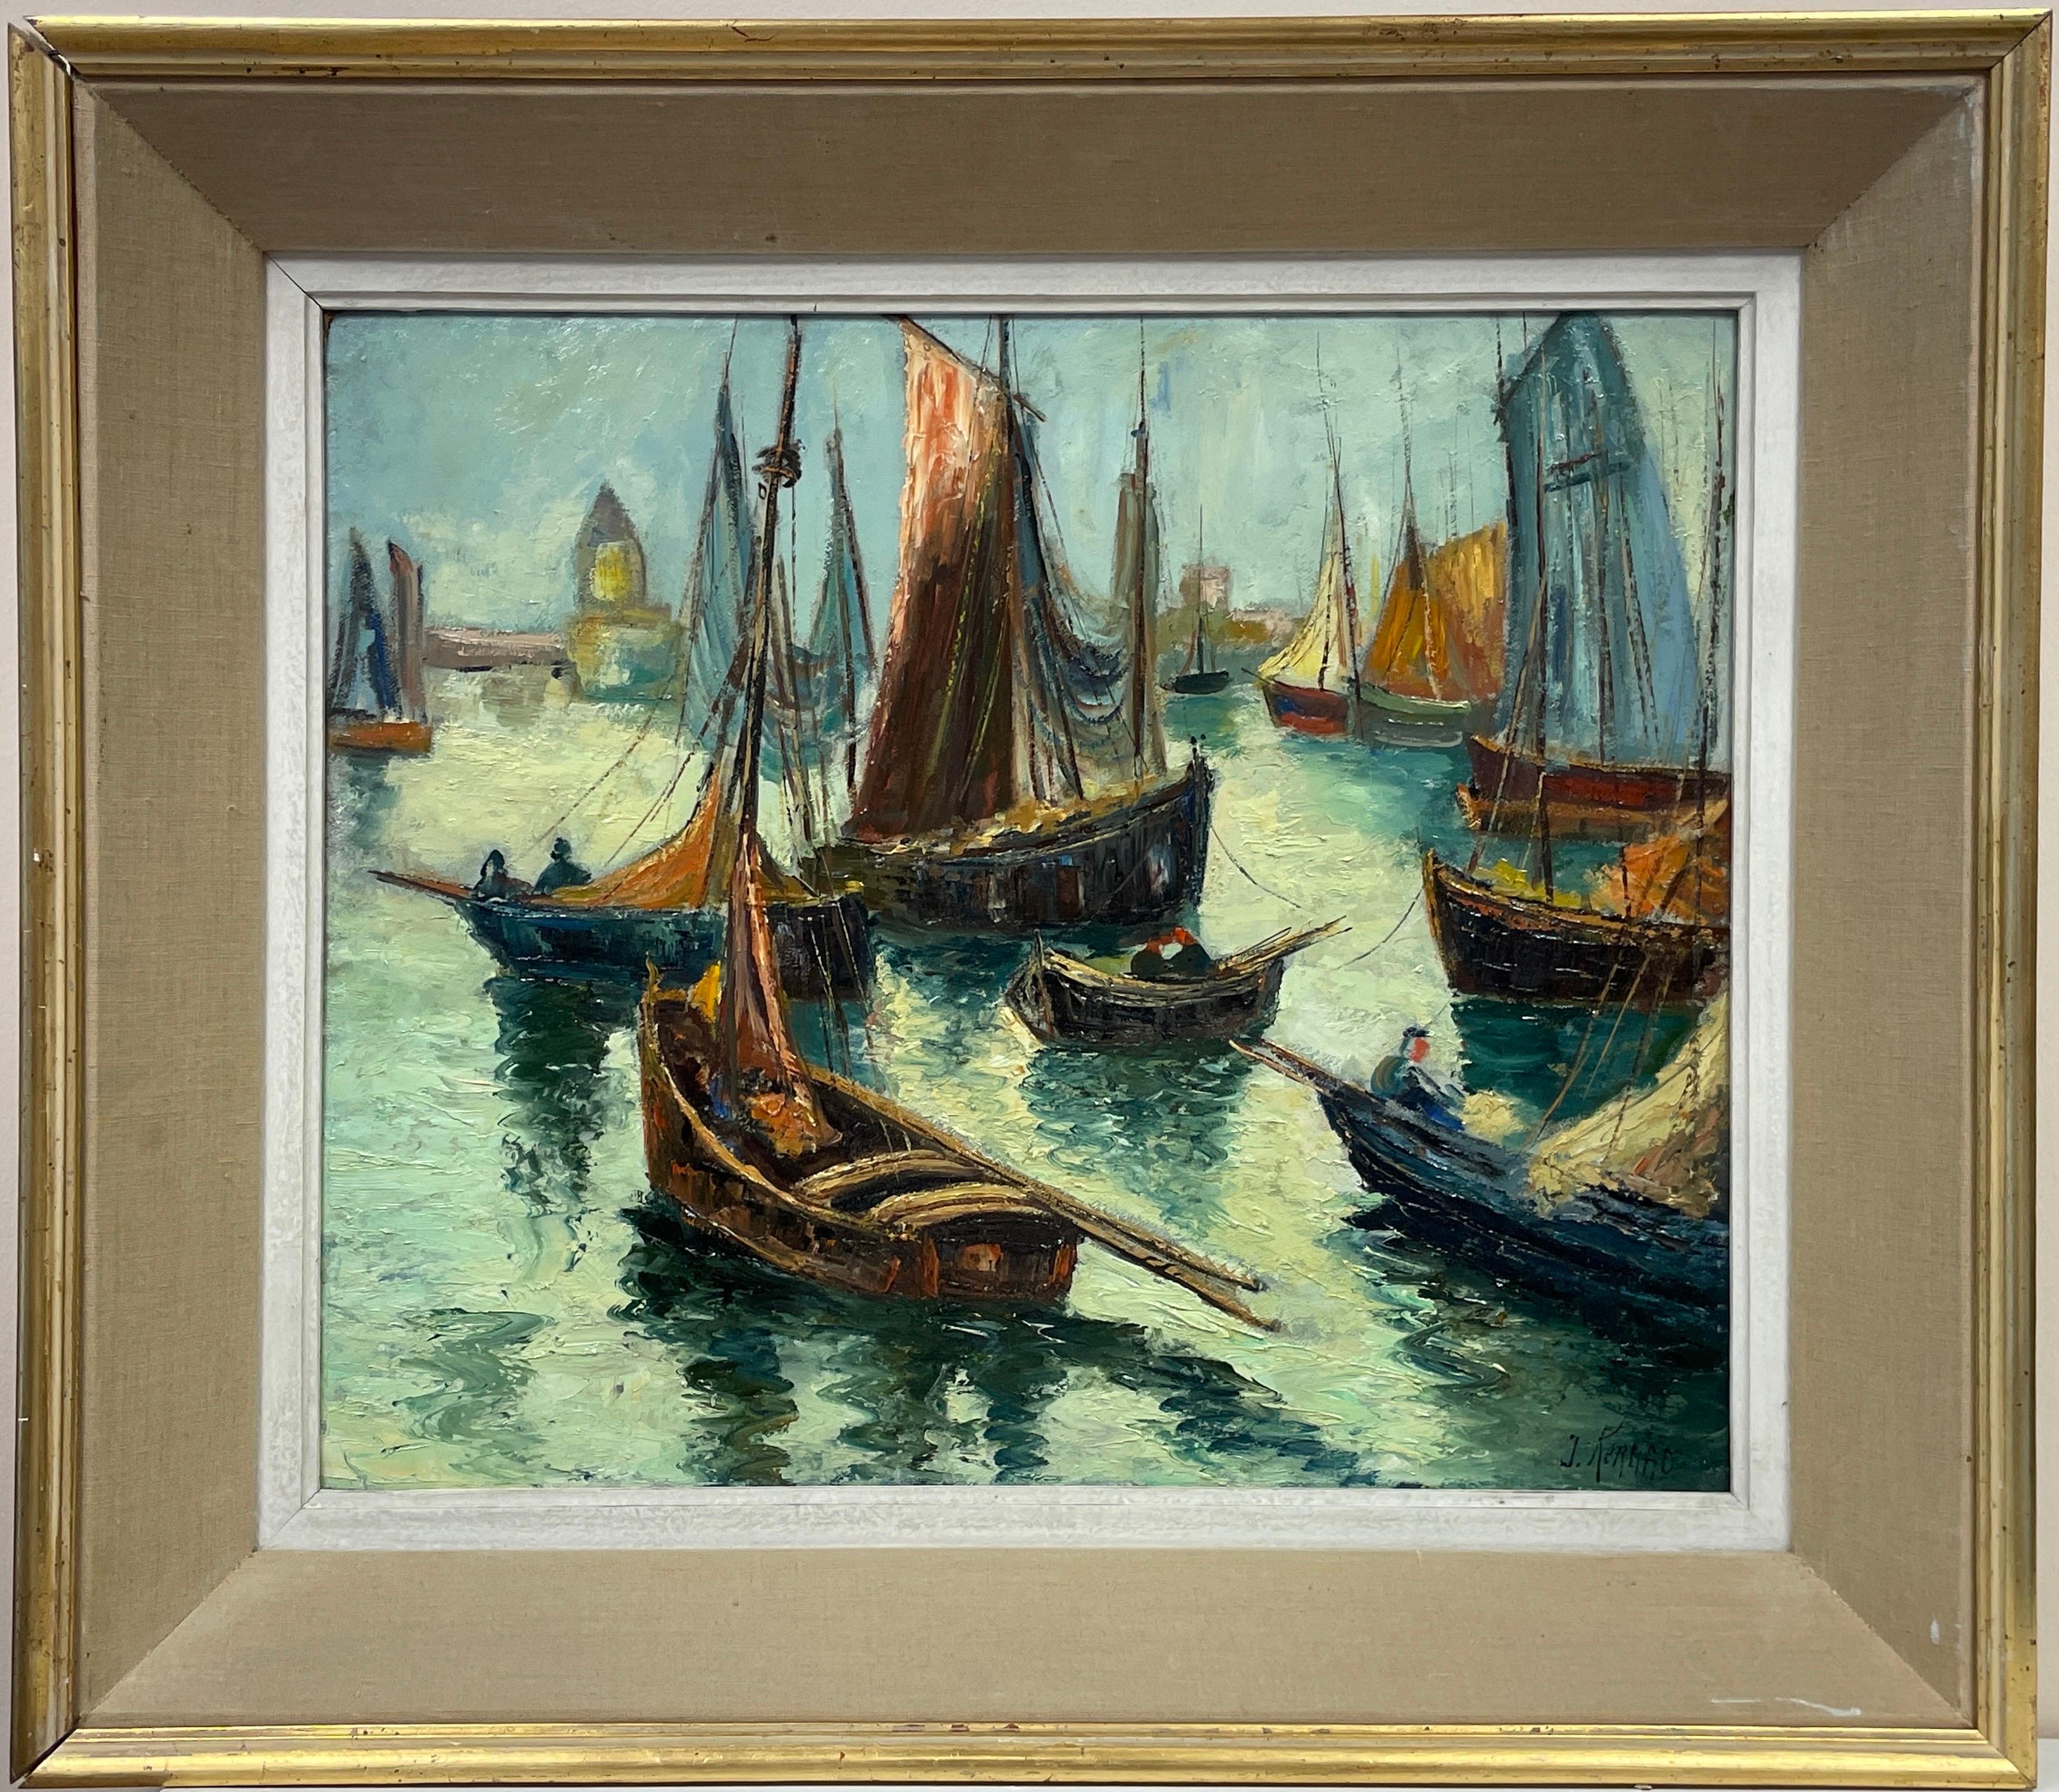 French Mid Century Figurative Painting - 1950's French Fishing Boats in Sleepy Harbour Beautiful Impasto Sludgy Oil